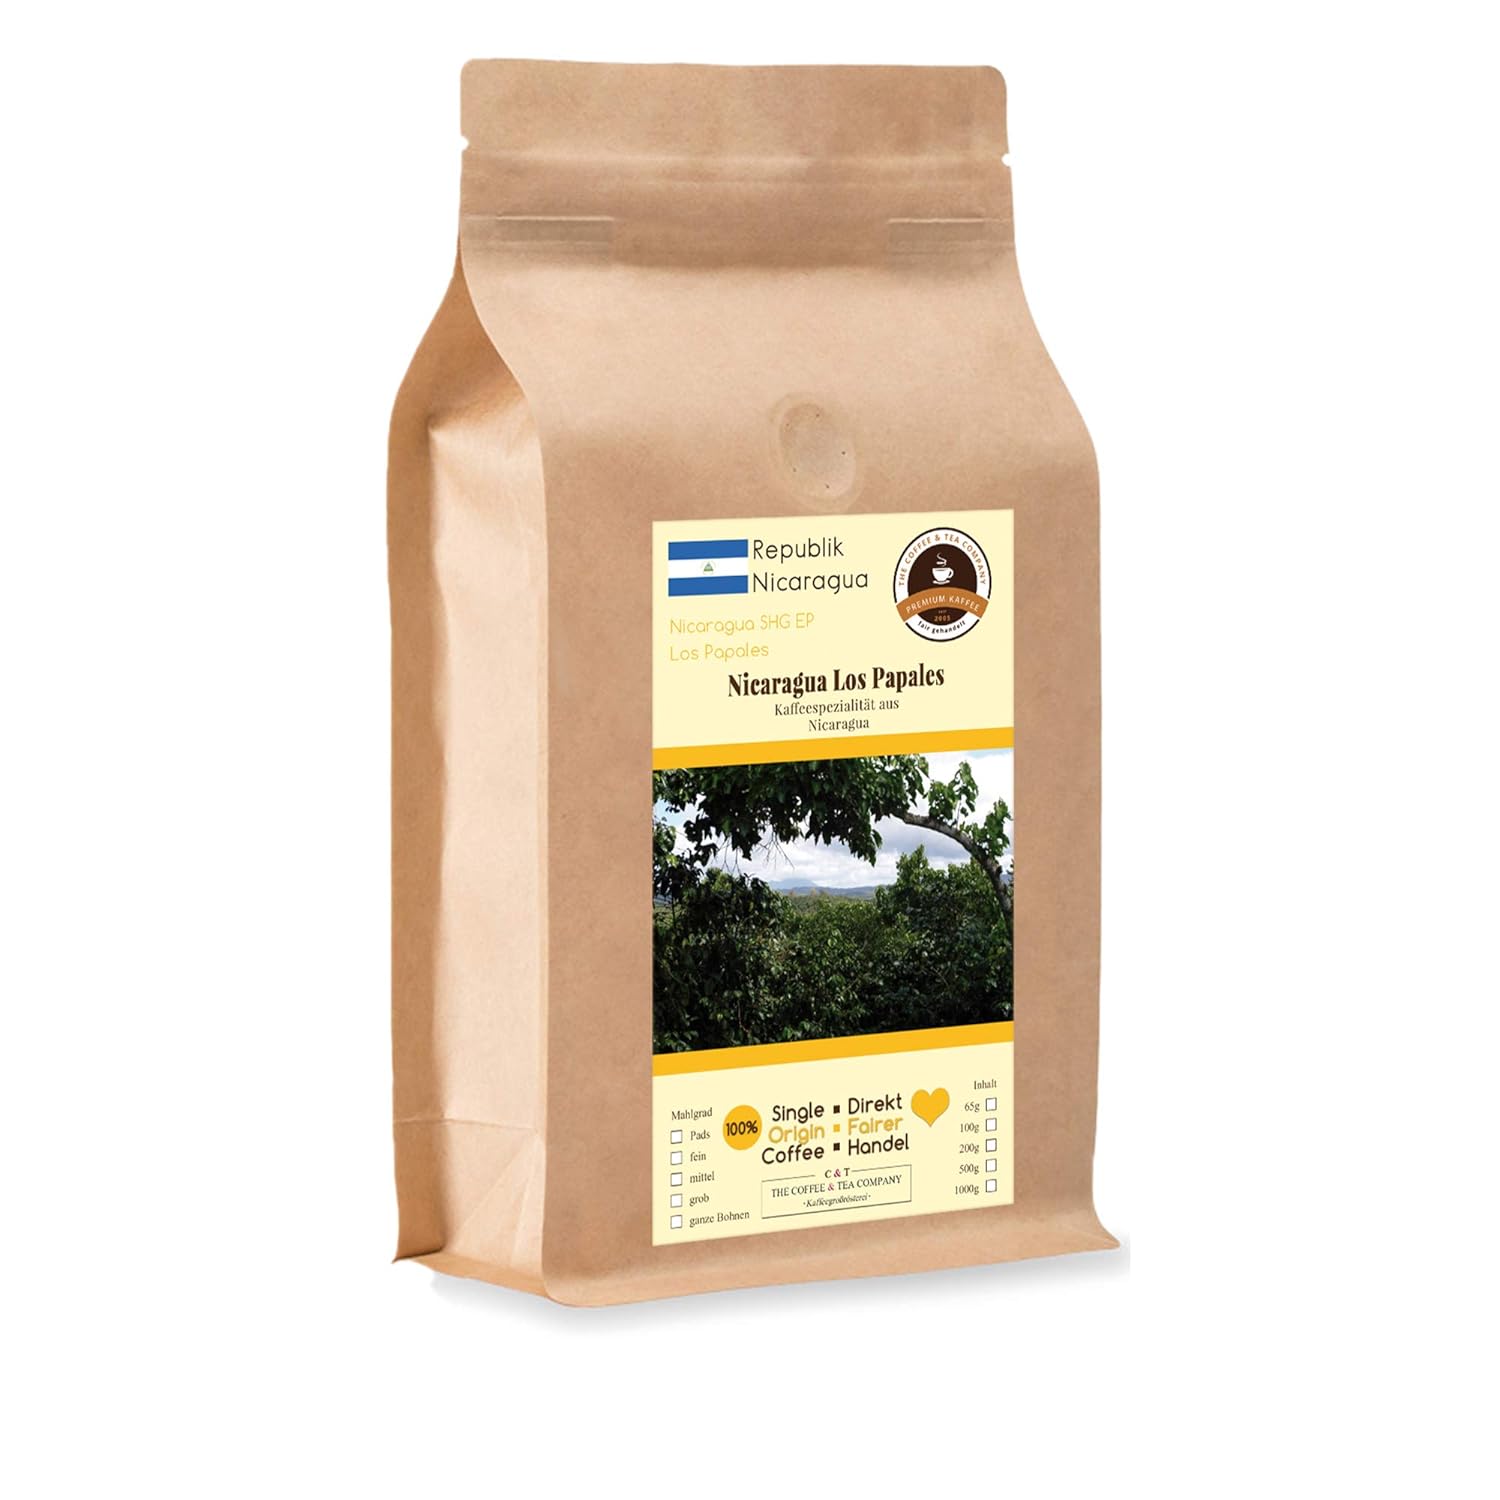 Coffee Globetrotter - Coffee with Heart - Nicaragua Los Papales - 1000 g Medium Ground - for Coffee Filter Machine, Hand Filter - Top Coffee Fair Trade Supports Social Projects